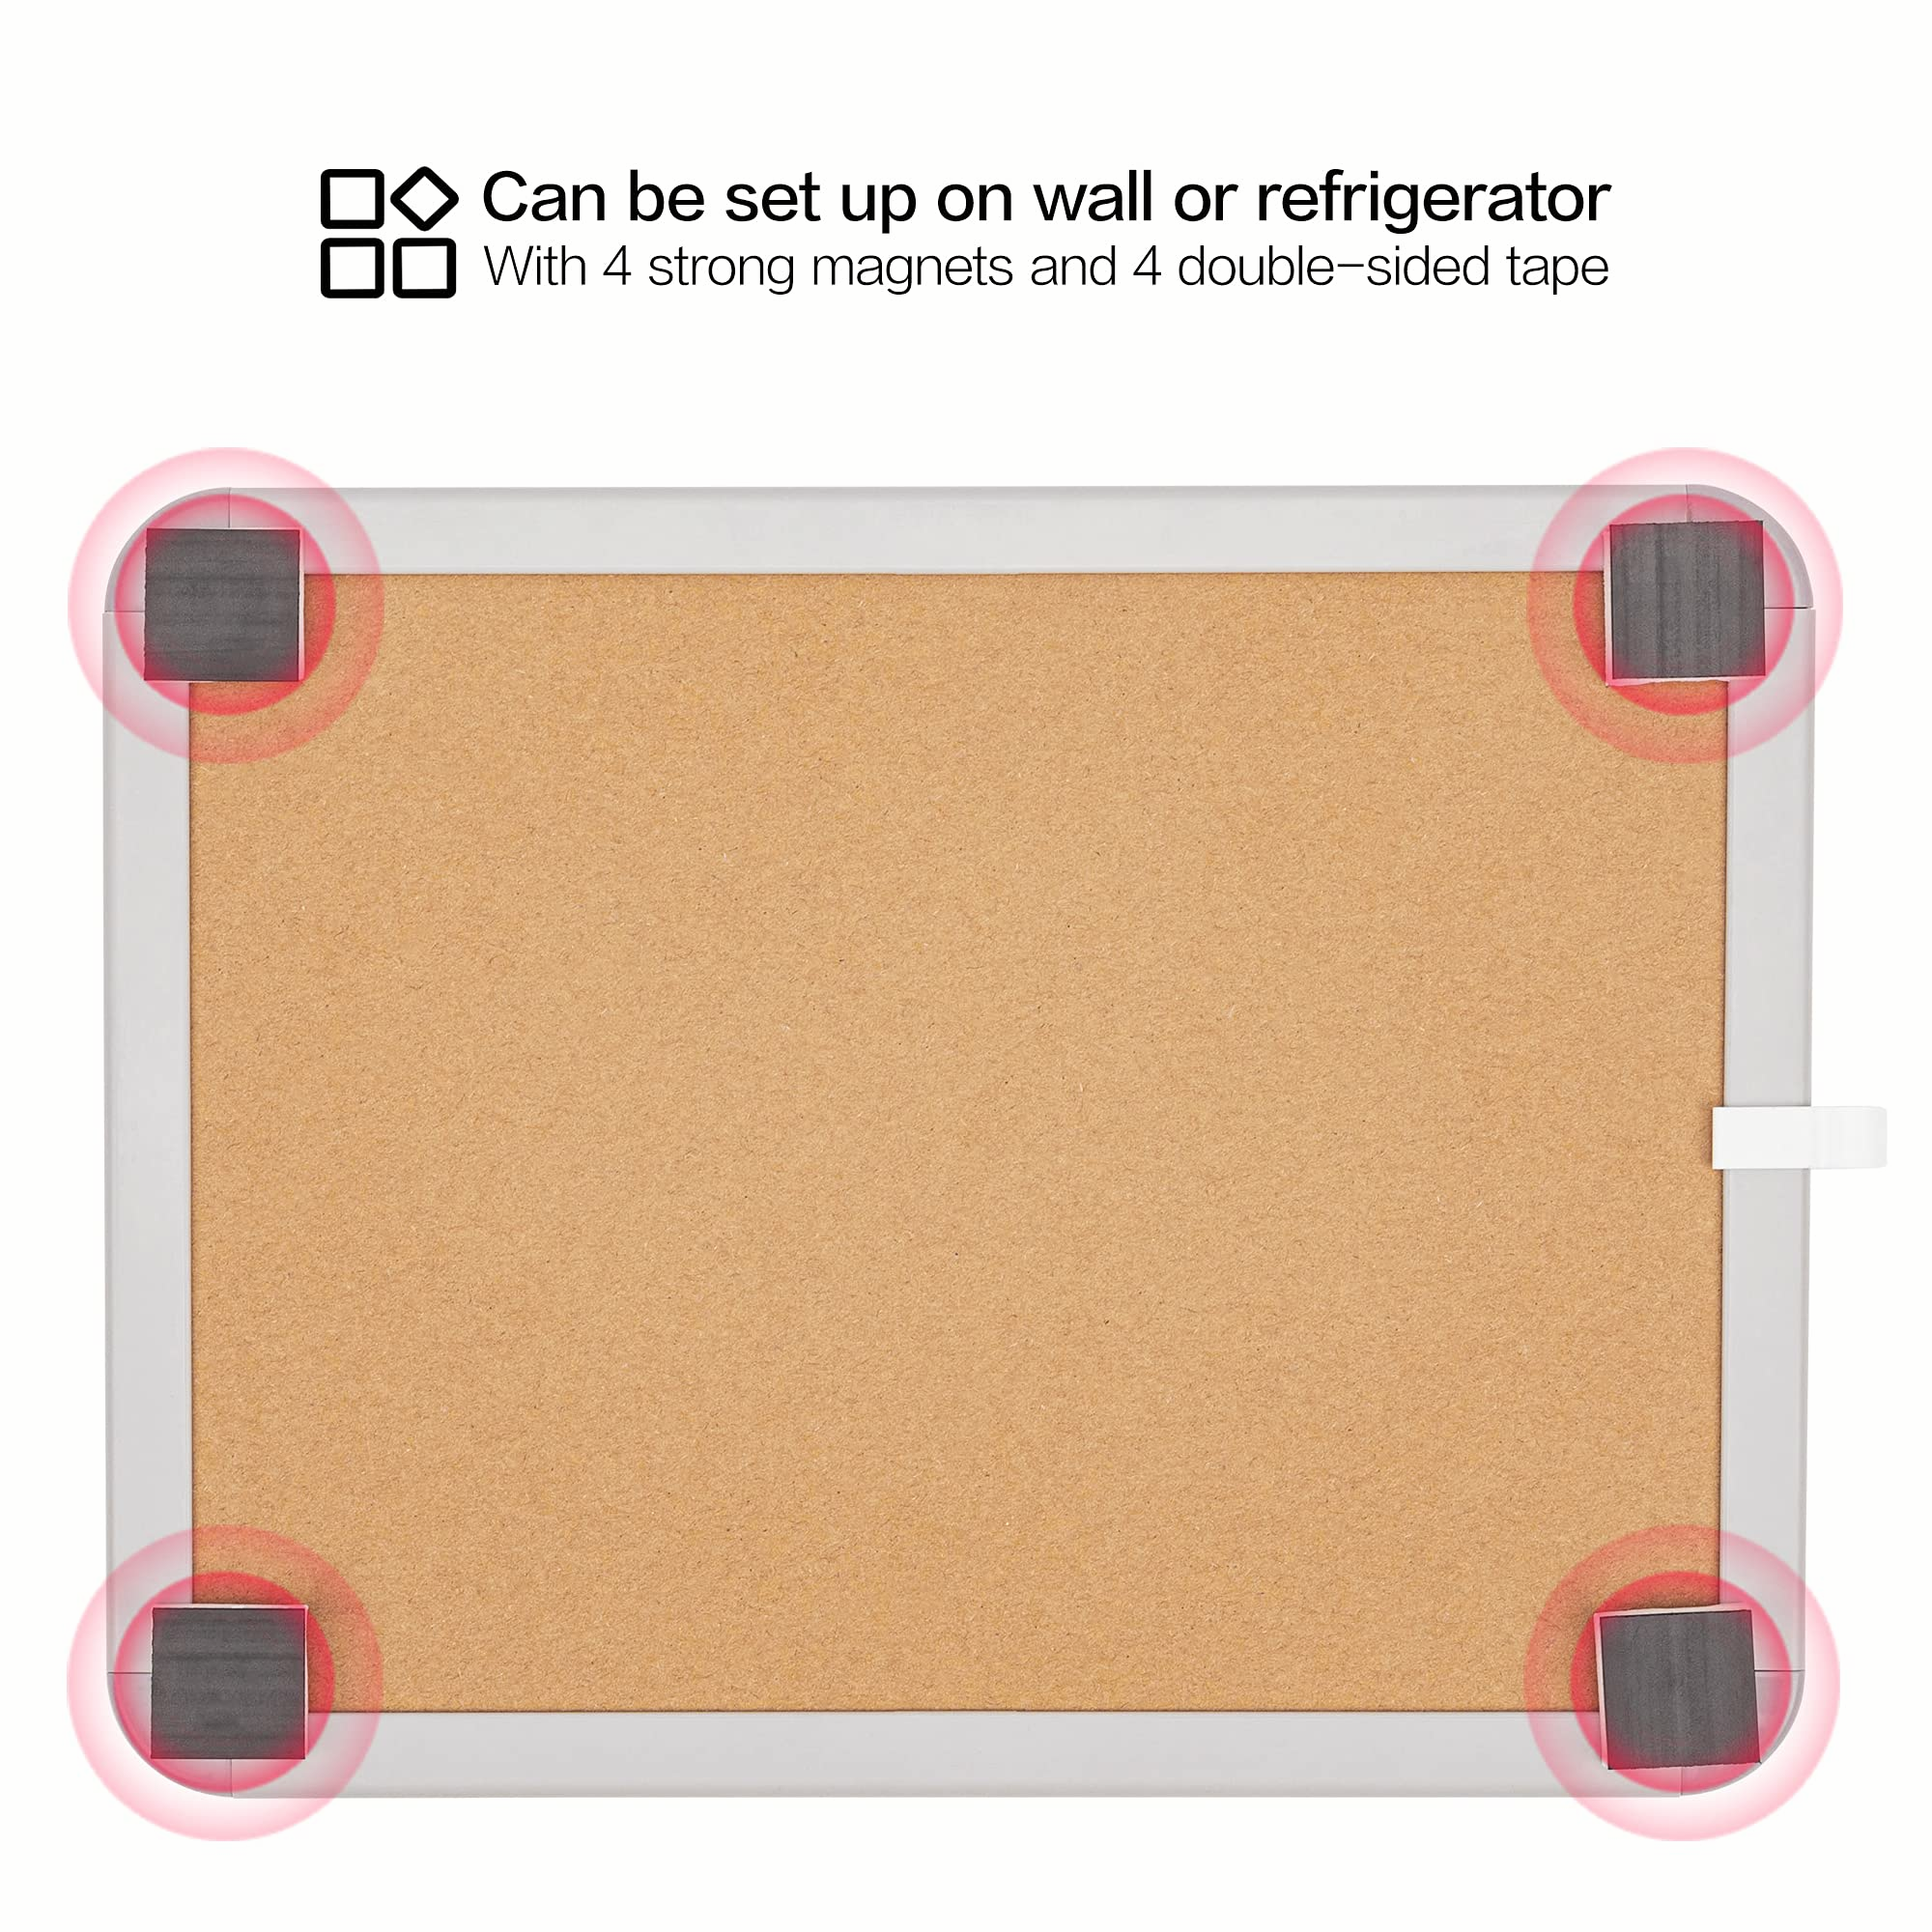 2-Pack Dry Erase Board 8.5 x 11 Inches Magnetic Small Dry Erase Whiteboard, 4 Magnets and 8 Markers